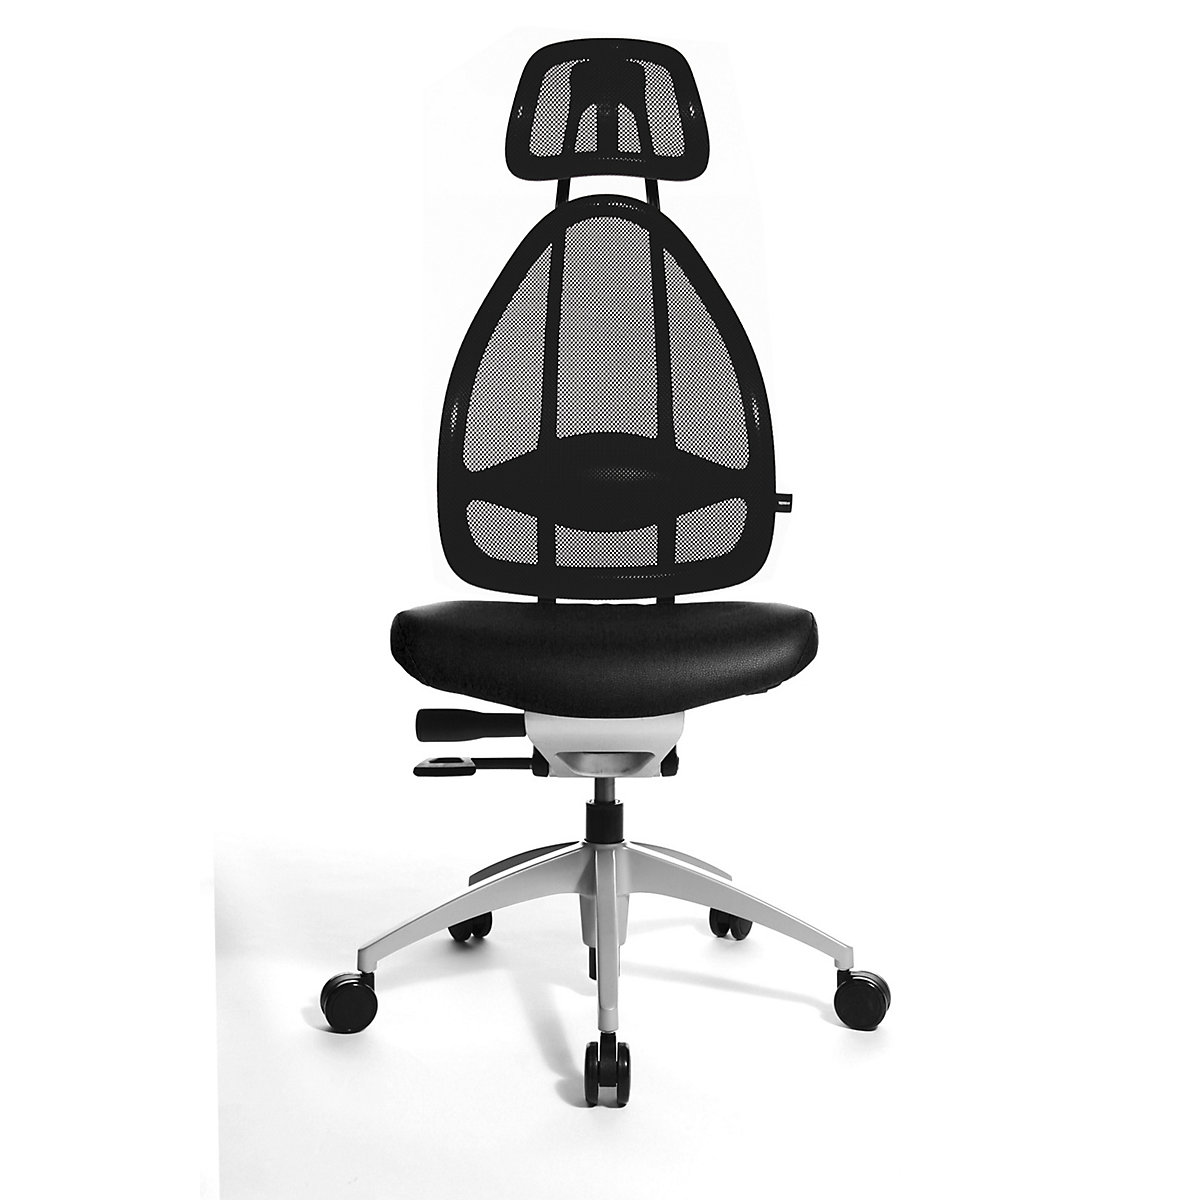 Designer office swivel chair, with head rest and mesh back rest – Topstar, effective back rest height 830 mm, black-8